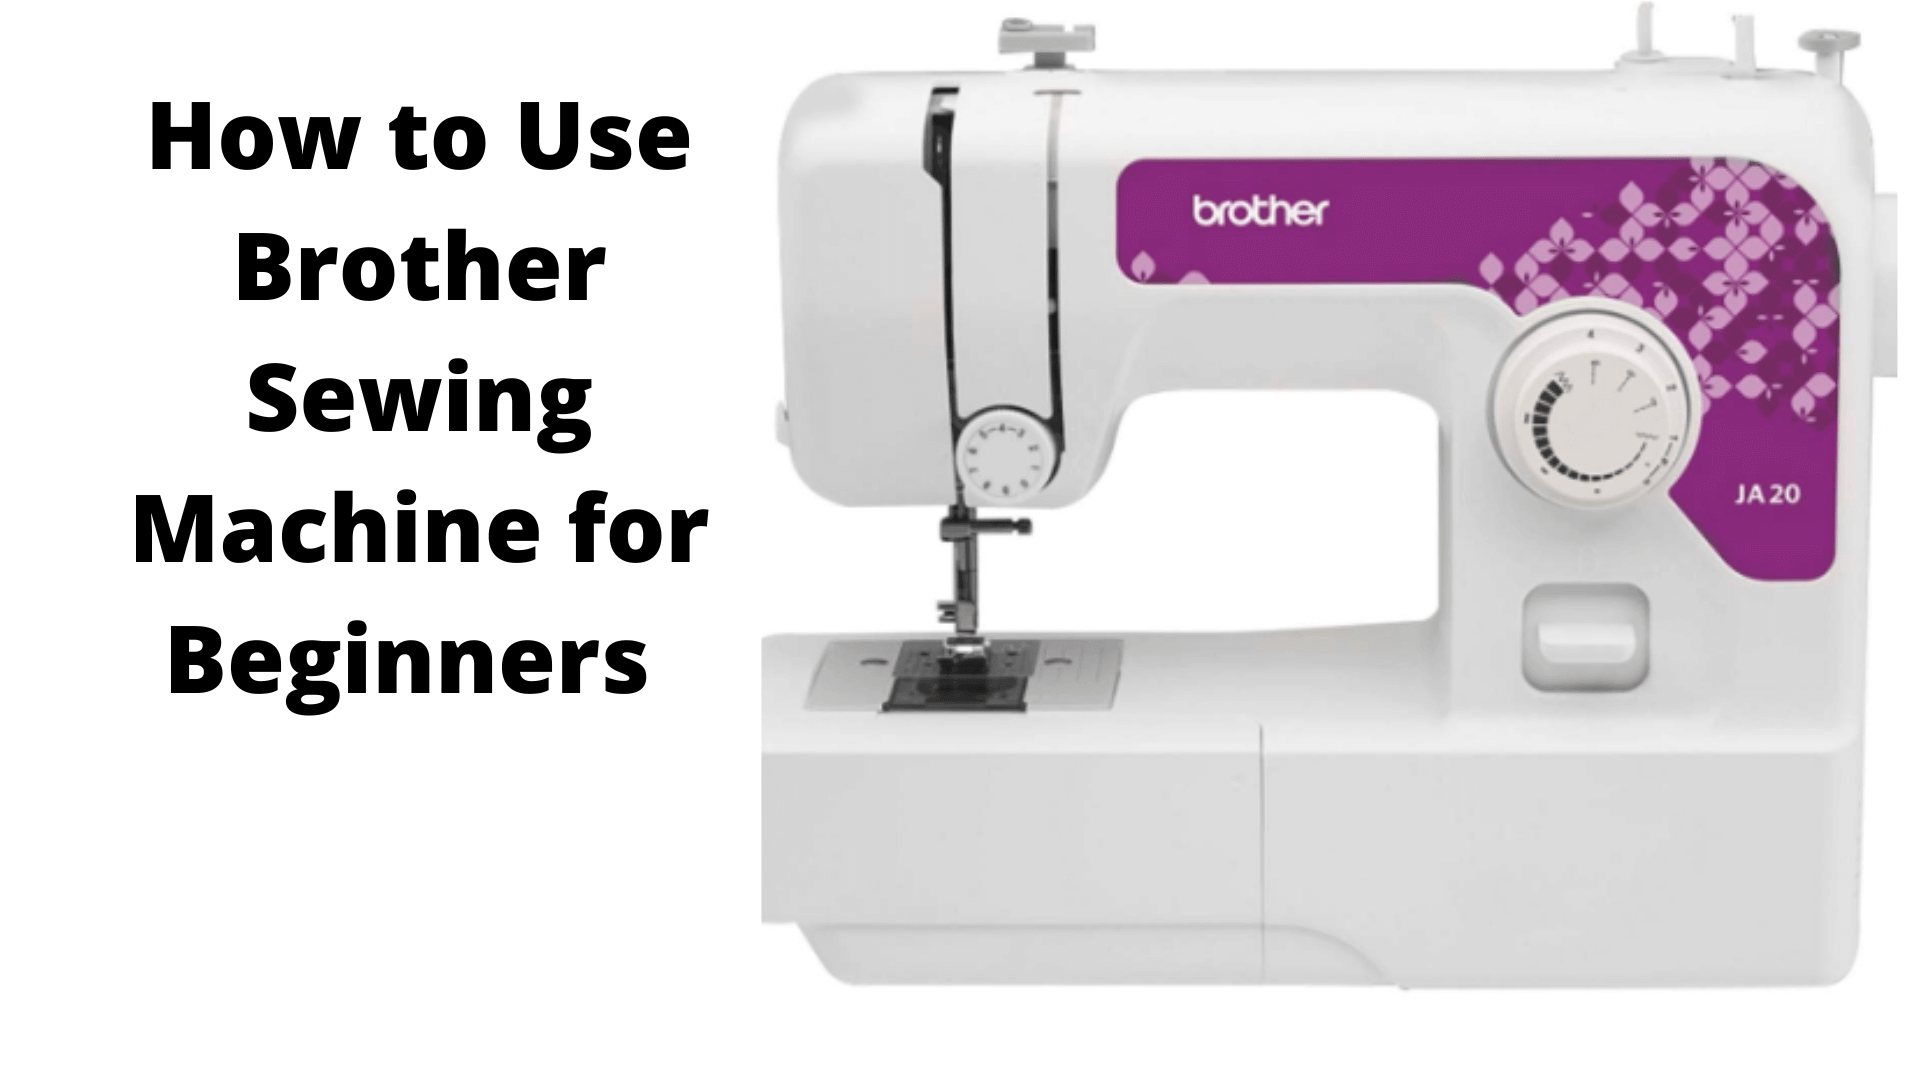 How to Setup Use a Brother Sewing Machine for Beginners